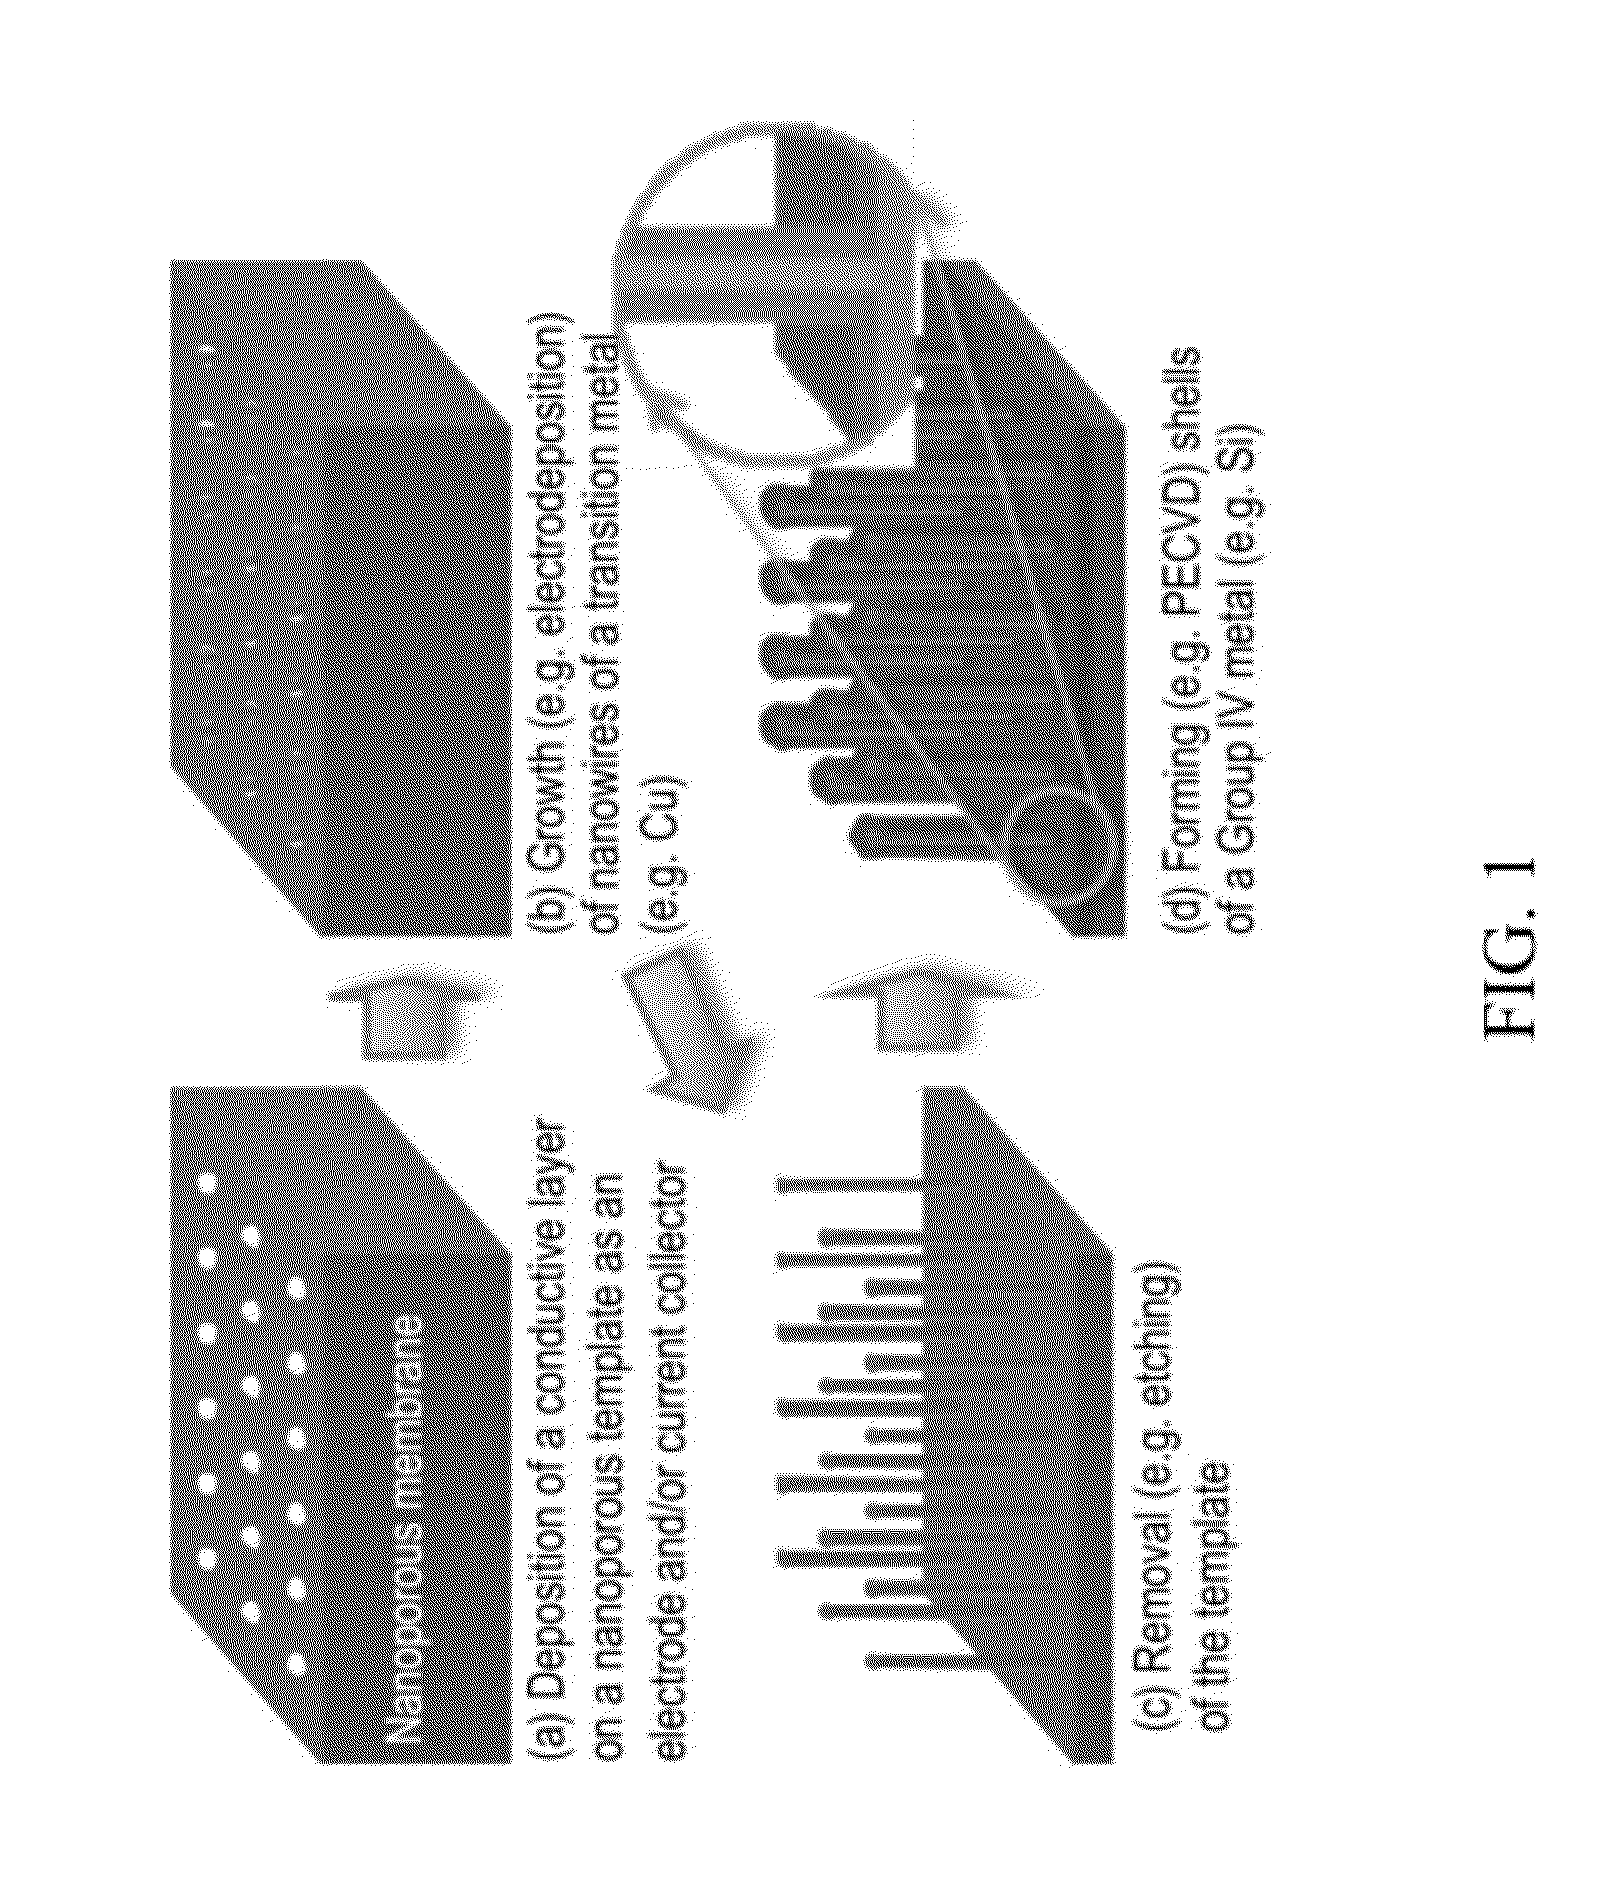 Composite nanowire compositions and methods of synthesis